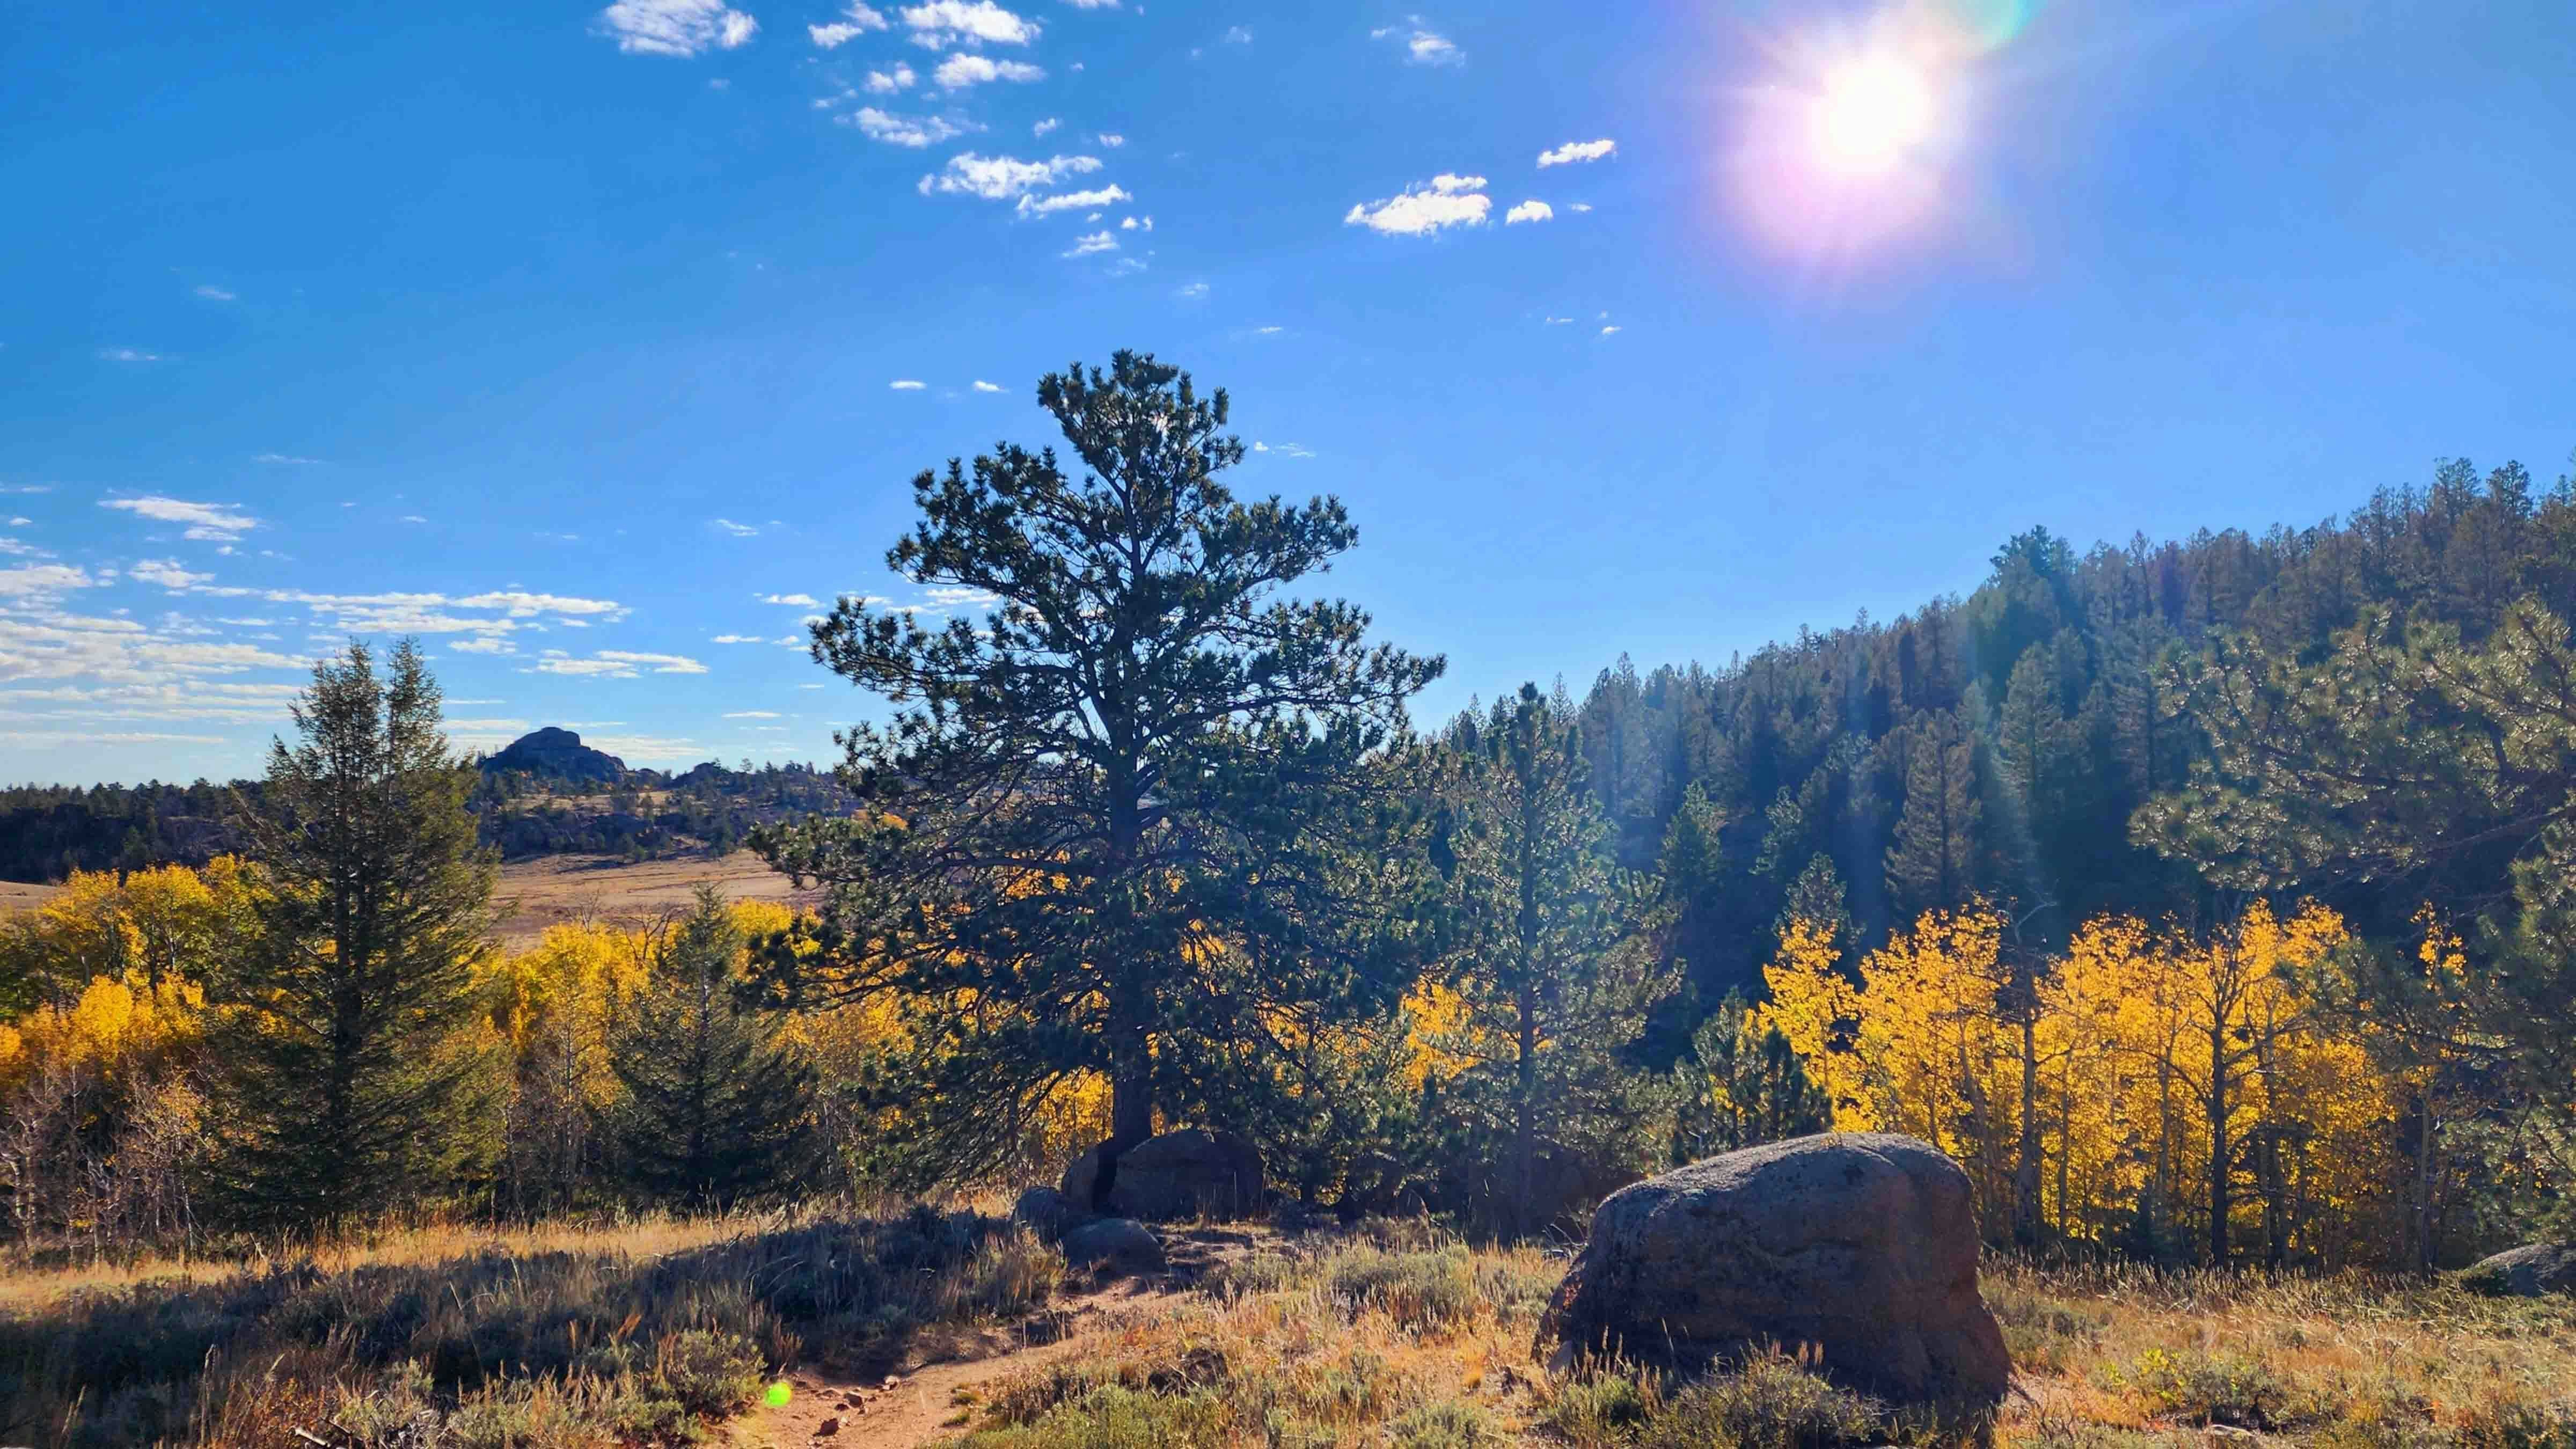 Turtle Rock Trail in Vedauwoo, Wyoming on Tuesday, Oct. 17, 2023